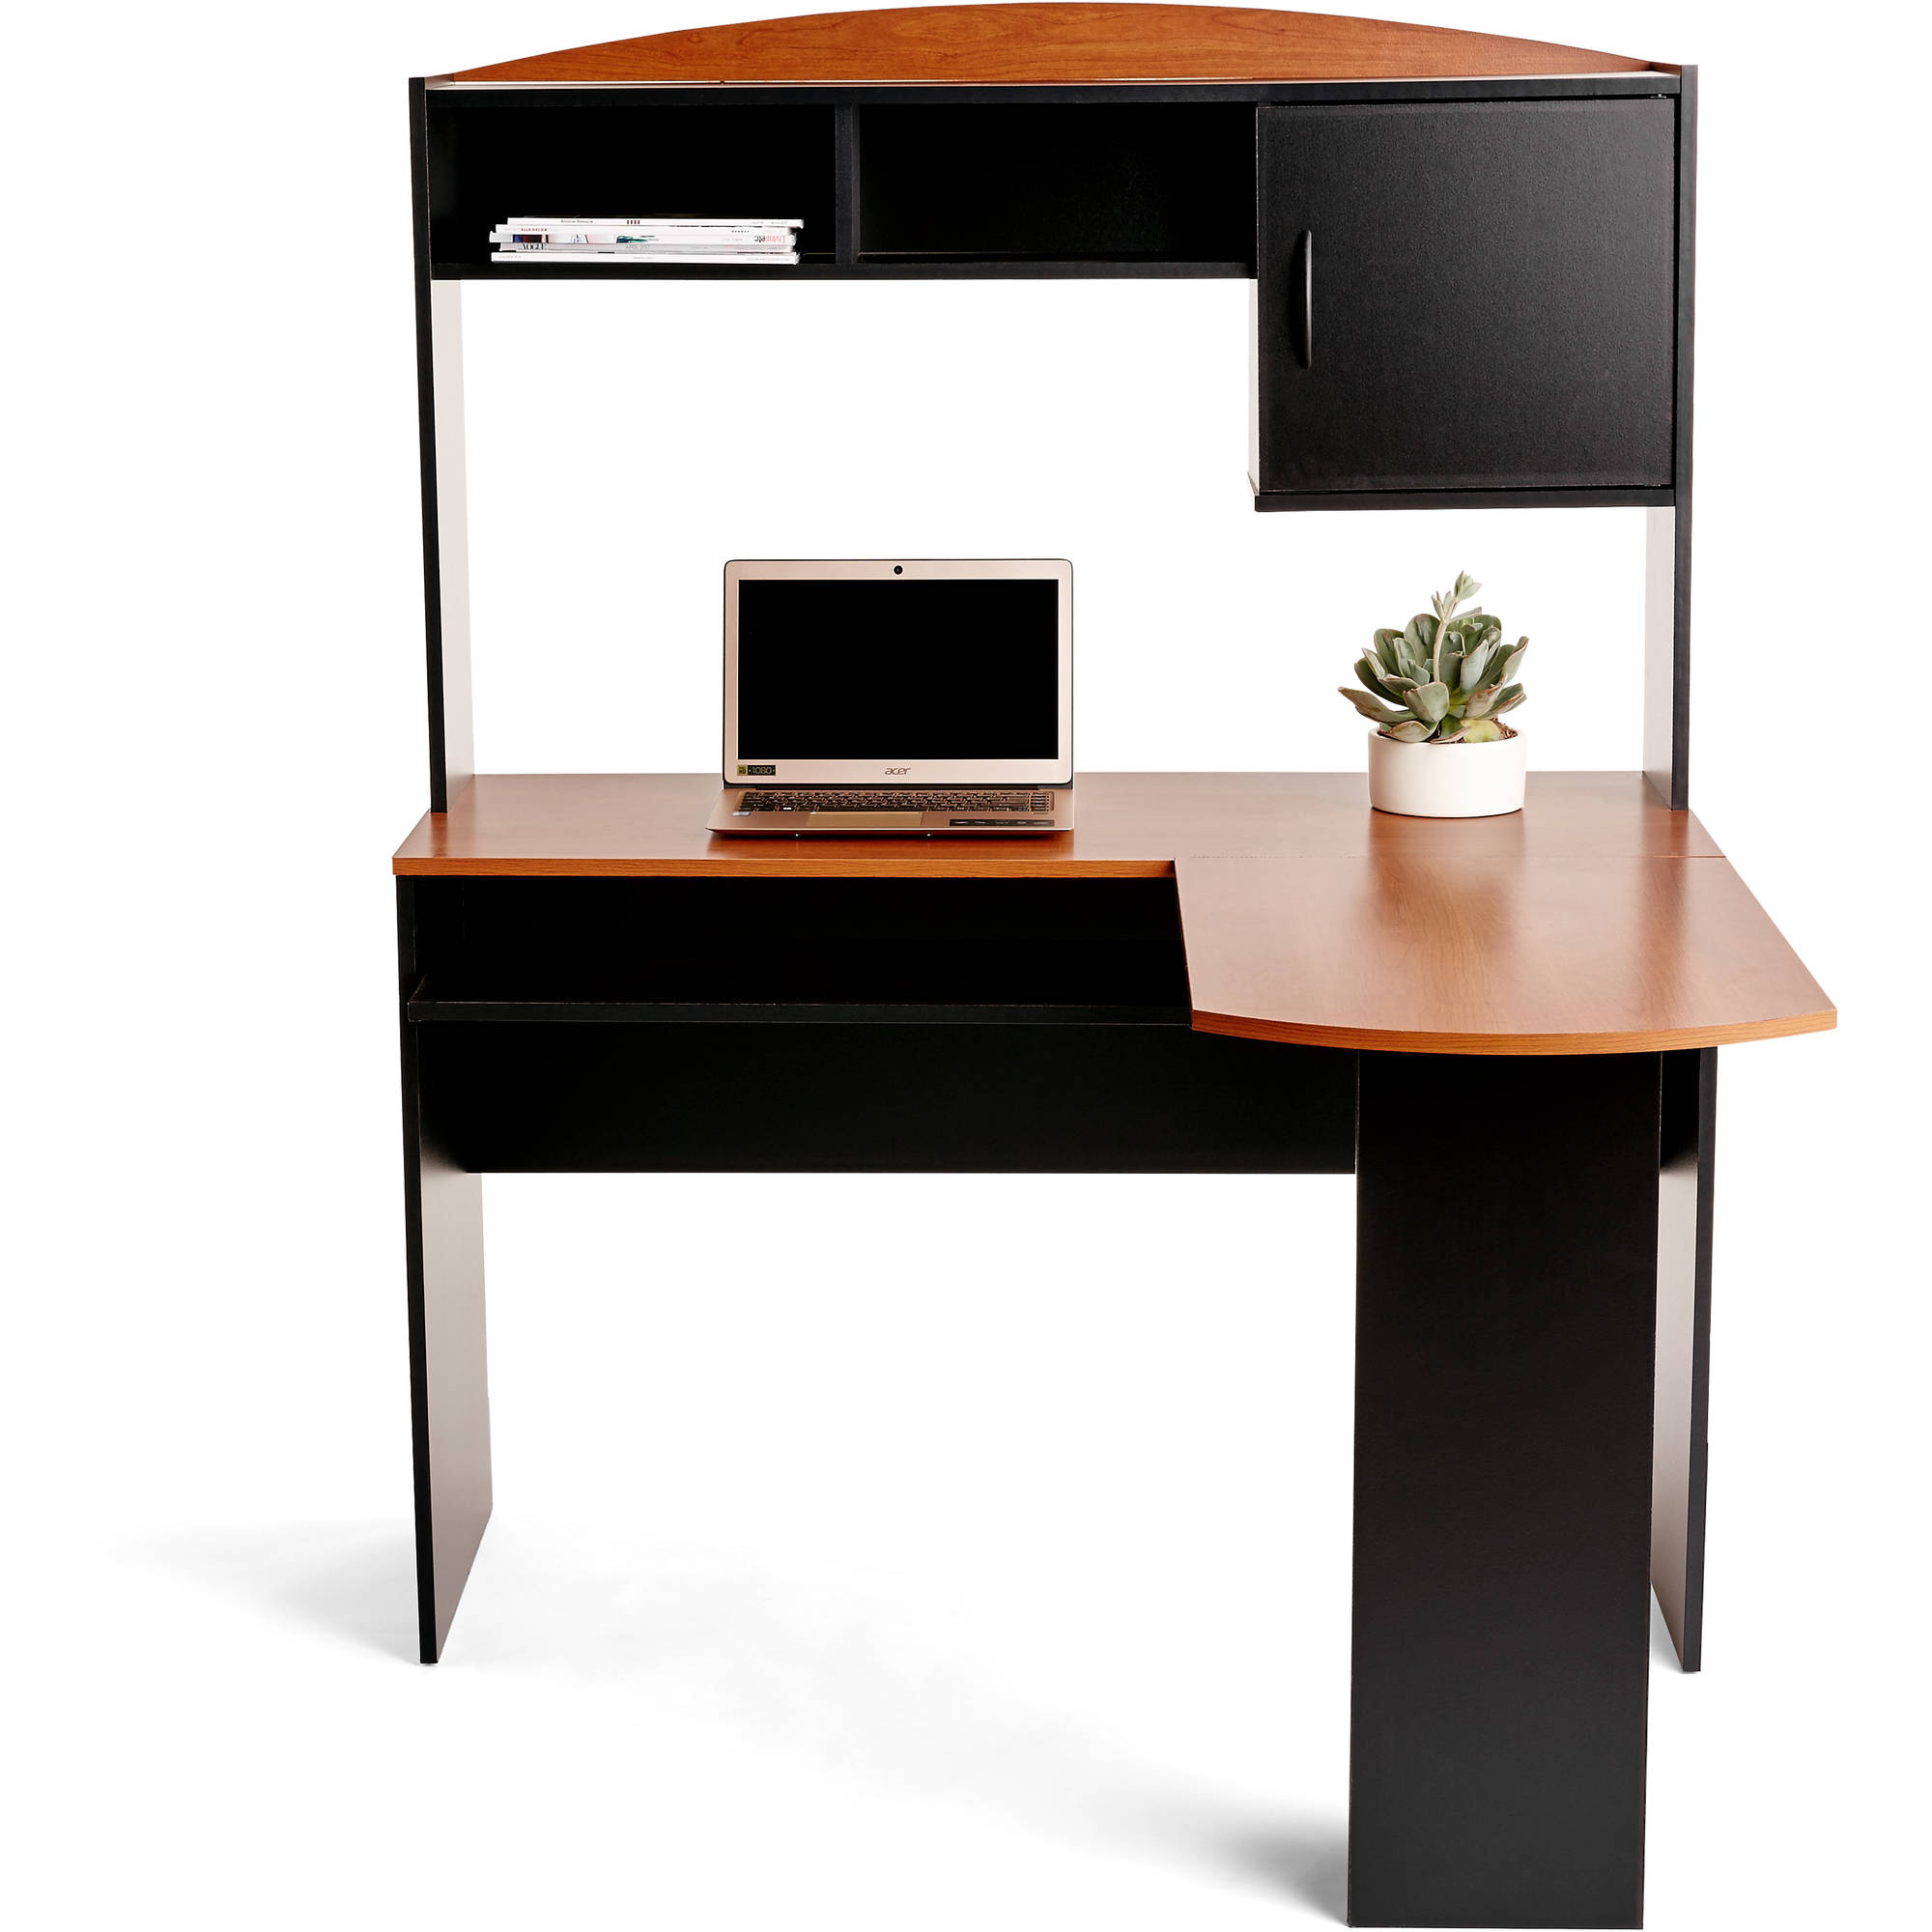 Ameriwood Home L-Shaped Desk with Hutch, Multiple Colors - image 3 of 4